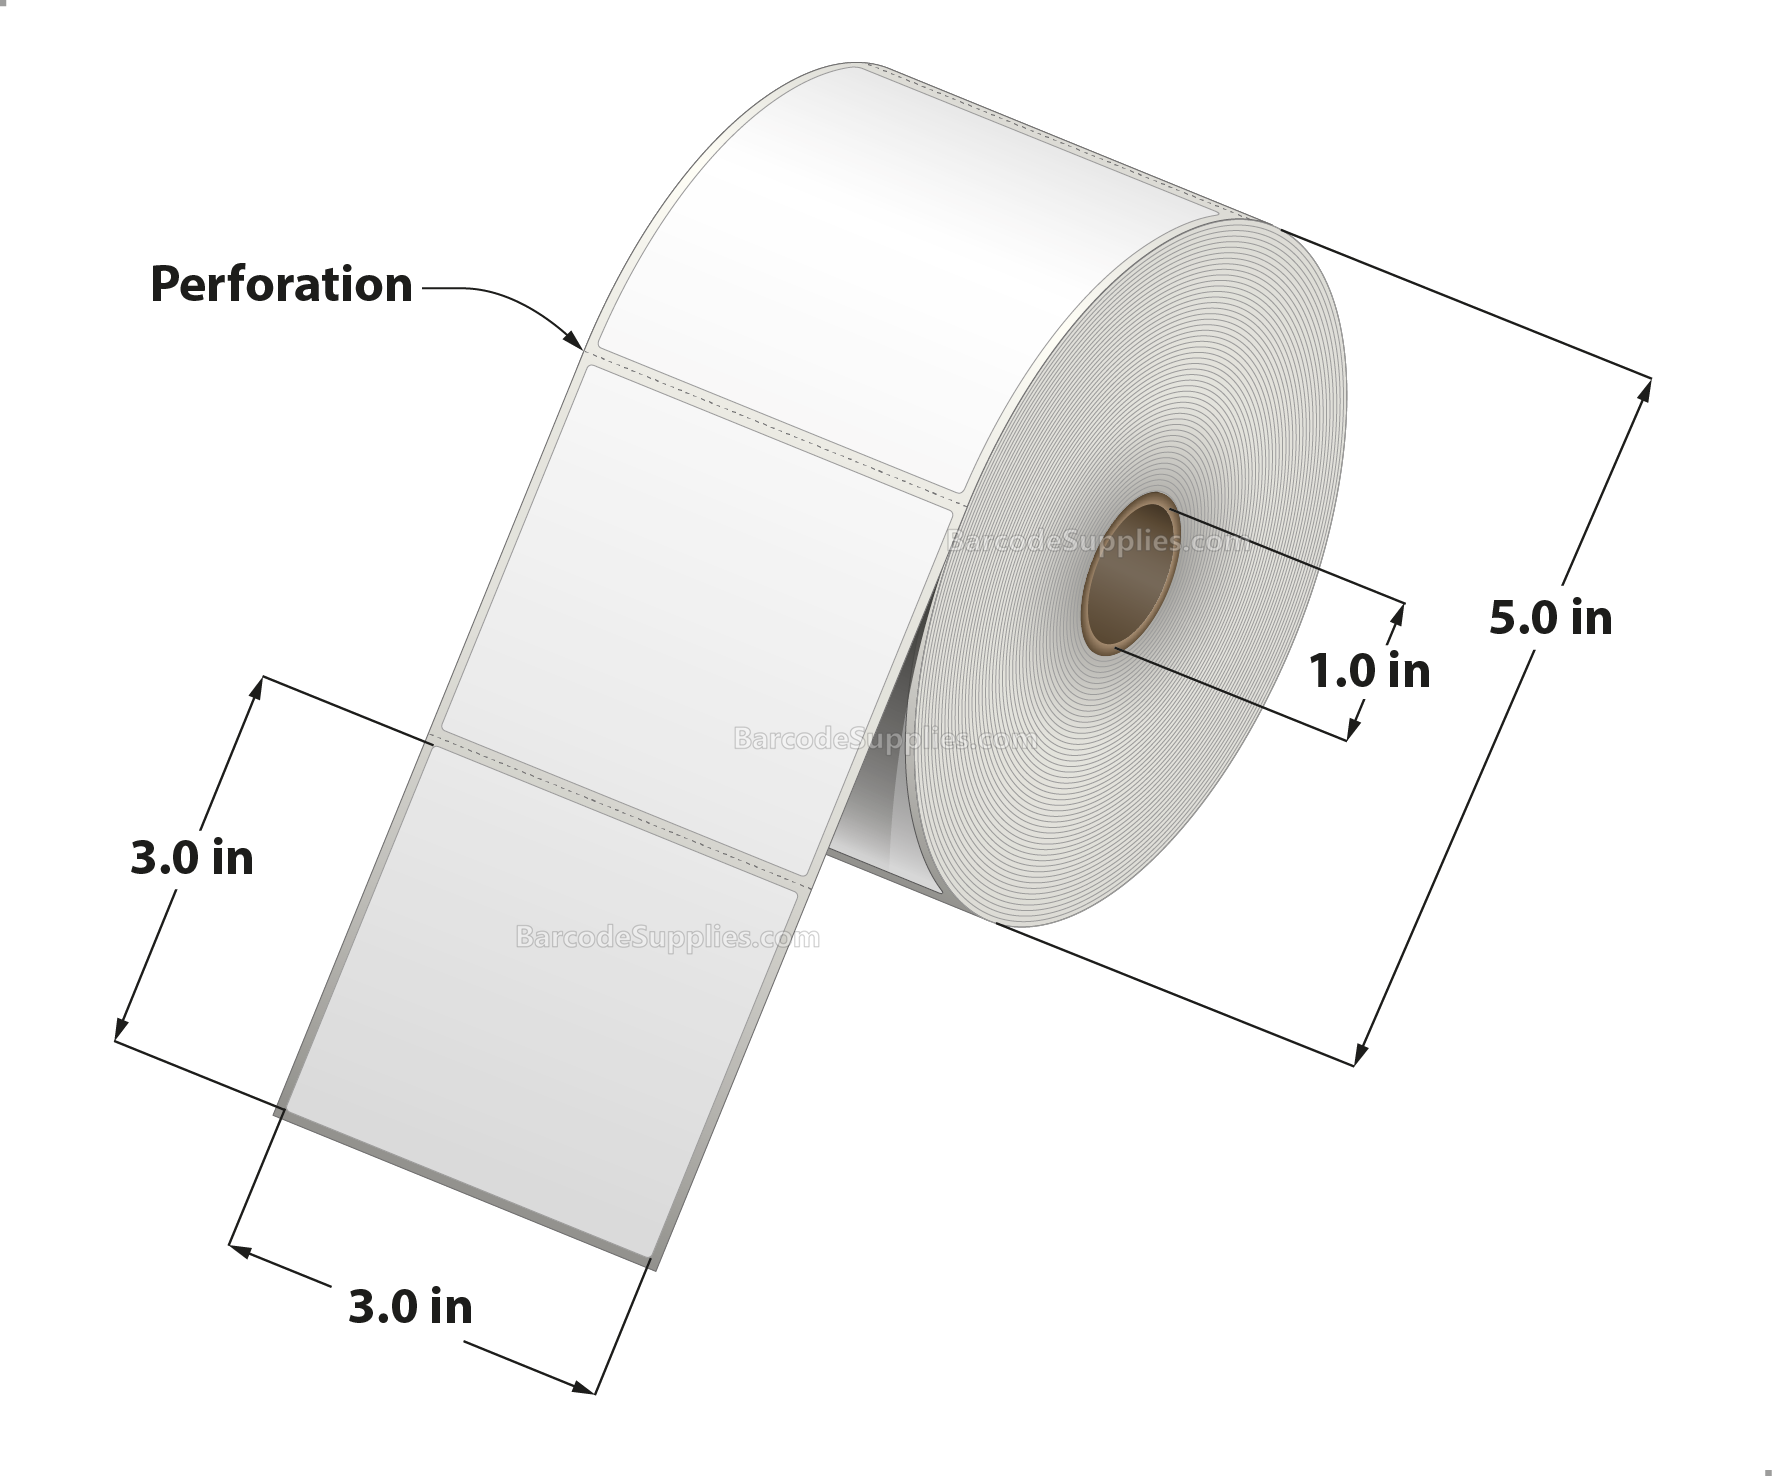 3 x 3 Thermal Transfer White Labels With Permanent Acrylic Adhesive - Perforated - 850 Labels Per Roll - Carton Of 4 Rolls - 3400 Labels Total - MPN: TH33-15PTT